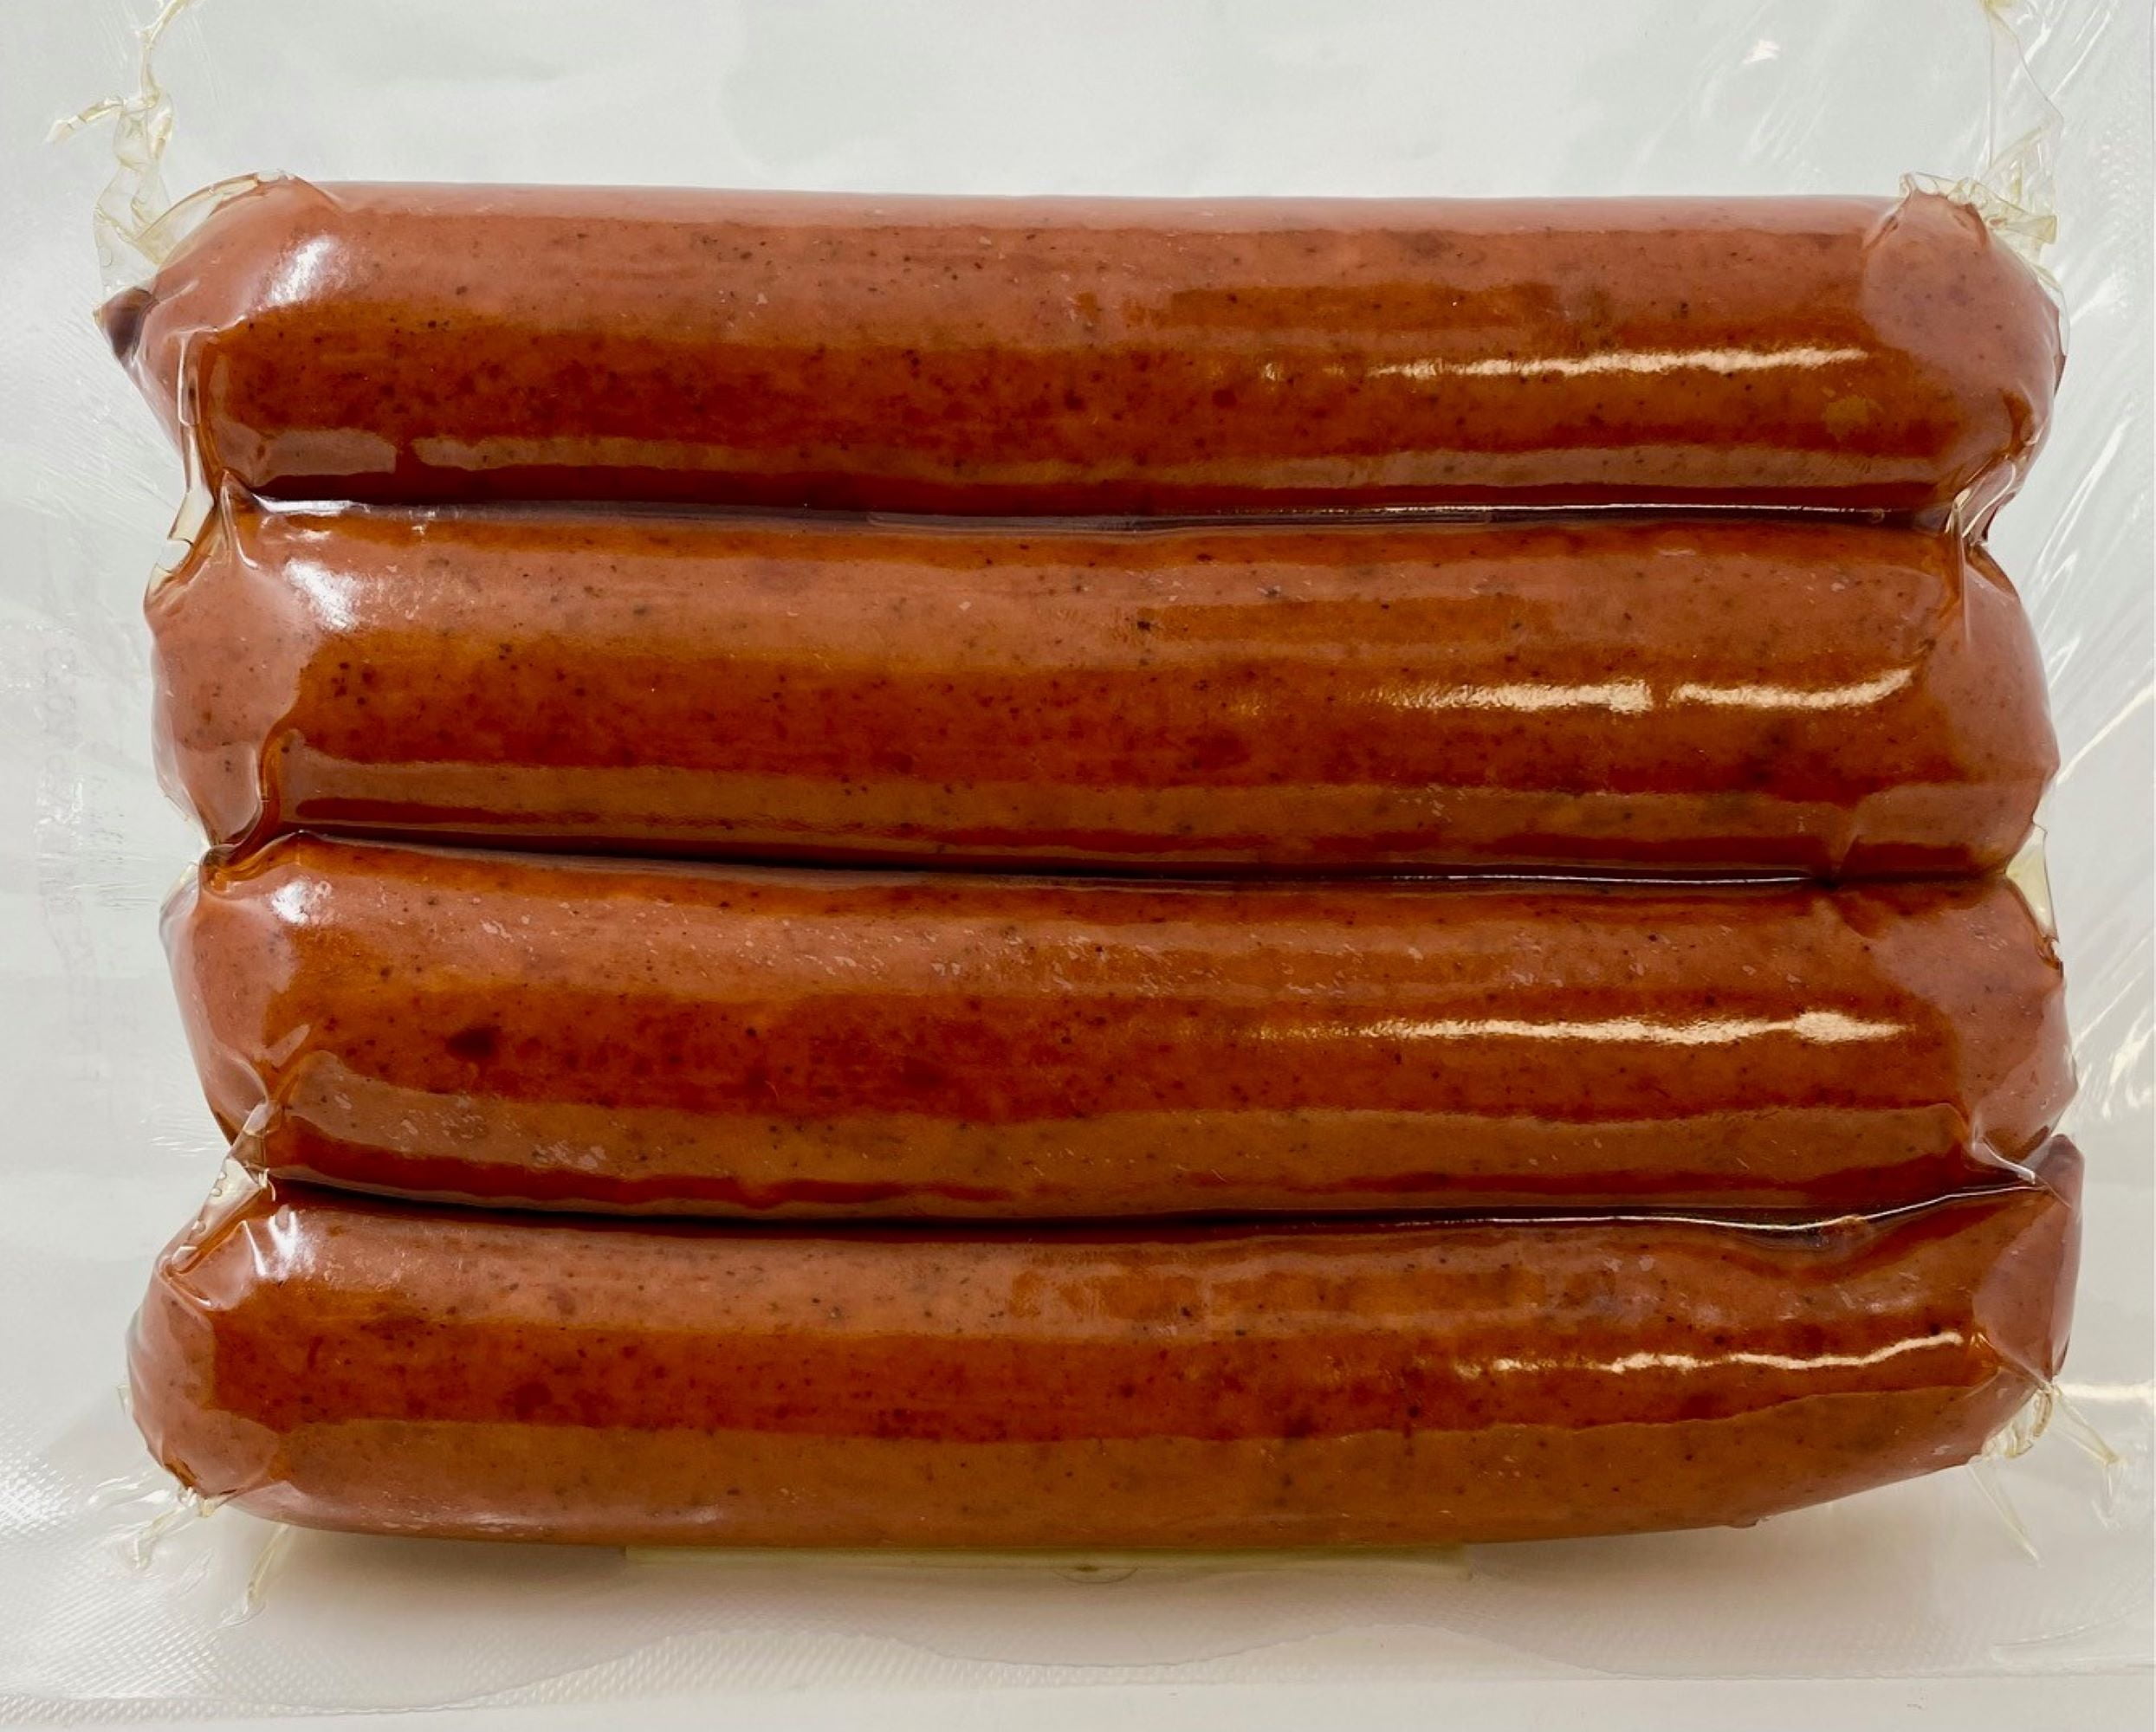 Calories in All Beef Hot Links from Silva